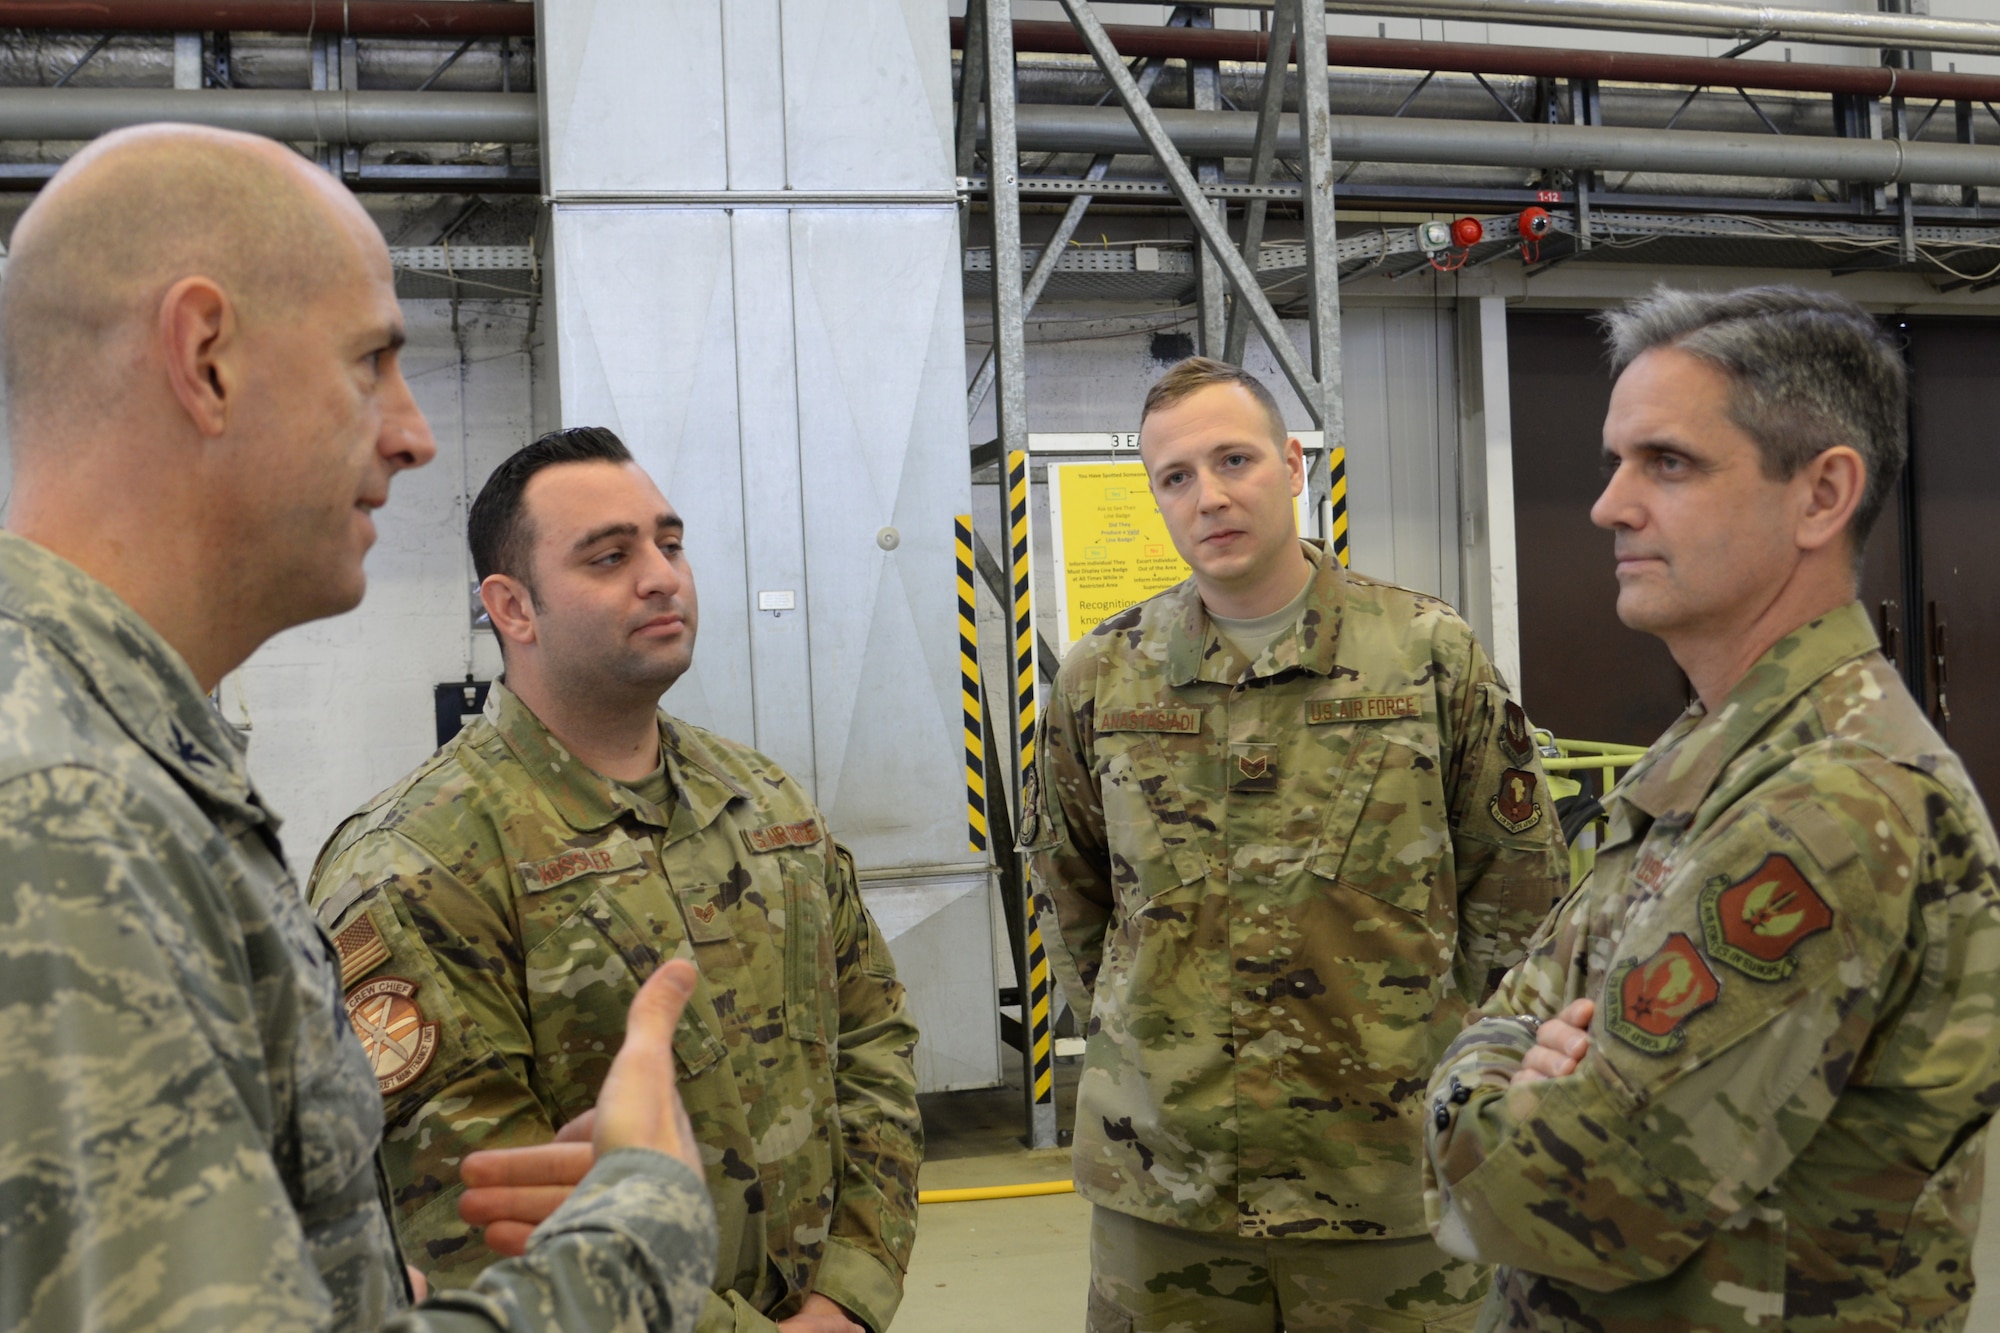 U.S. Air Force Col. John Knack, 86th Maintenance Group commander, far-left, meets Lt. Gen. Steven Basham, right, U.S. Air Forces in Europe-Air Forces Africa deputy commander, during a capabilities tour at Ramstein Air Base, Jan. 17,  2020. Basham listened to how the group operates, and also took suggestions on how to manage future expectations based on current capabilities.